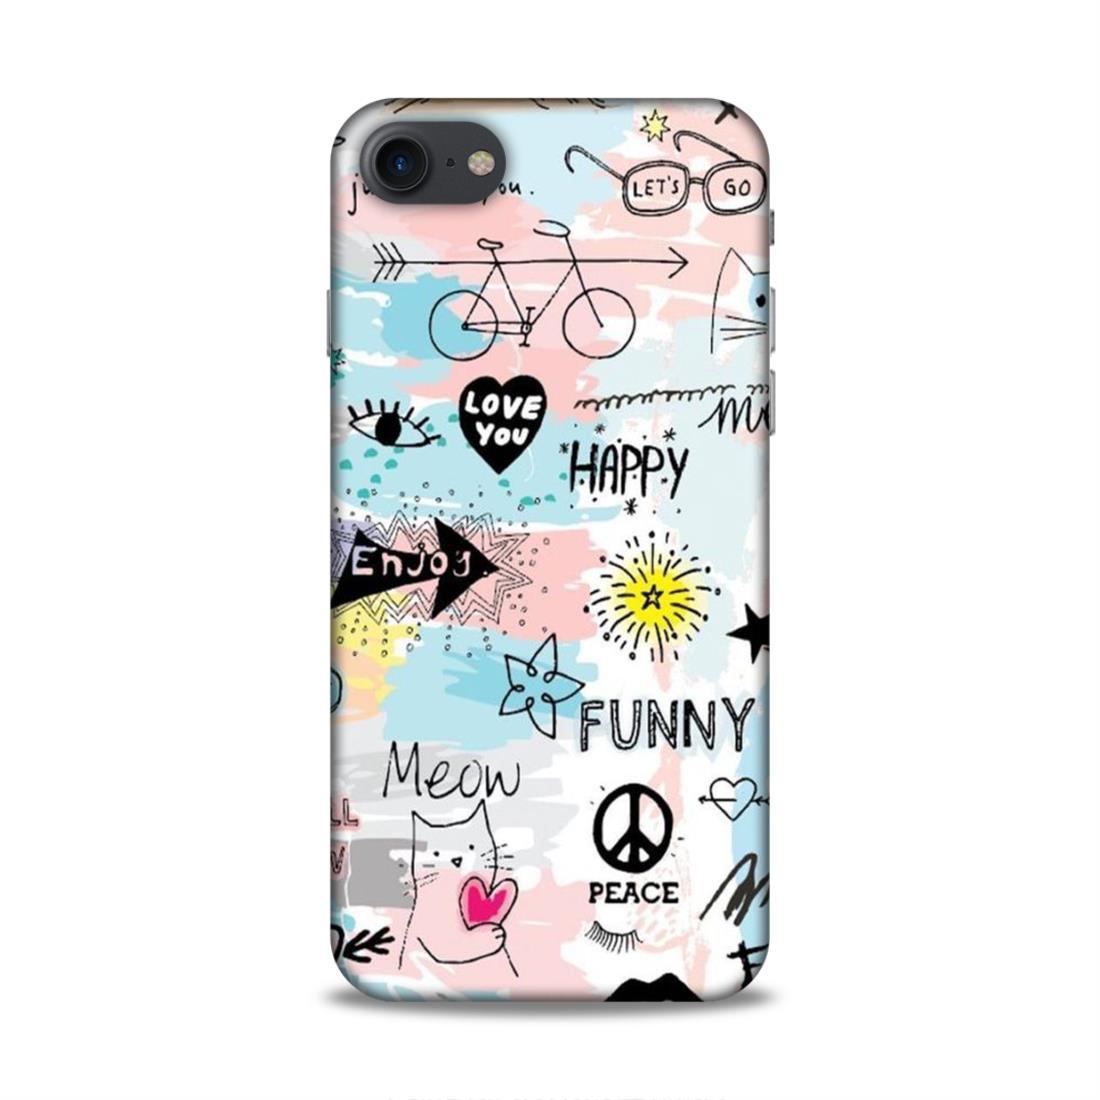 Cute Funky Happy iPhone 8 Mobile Cover Case